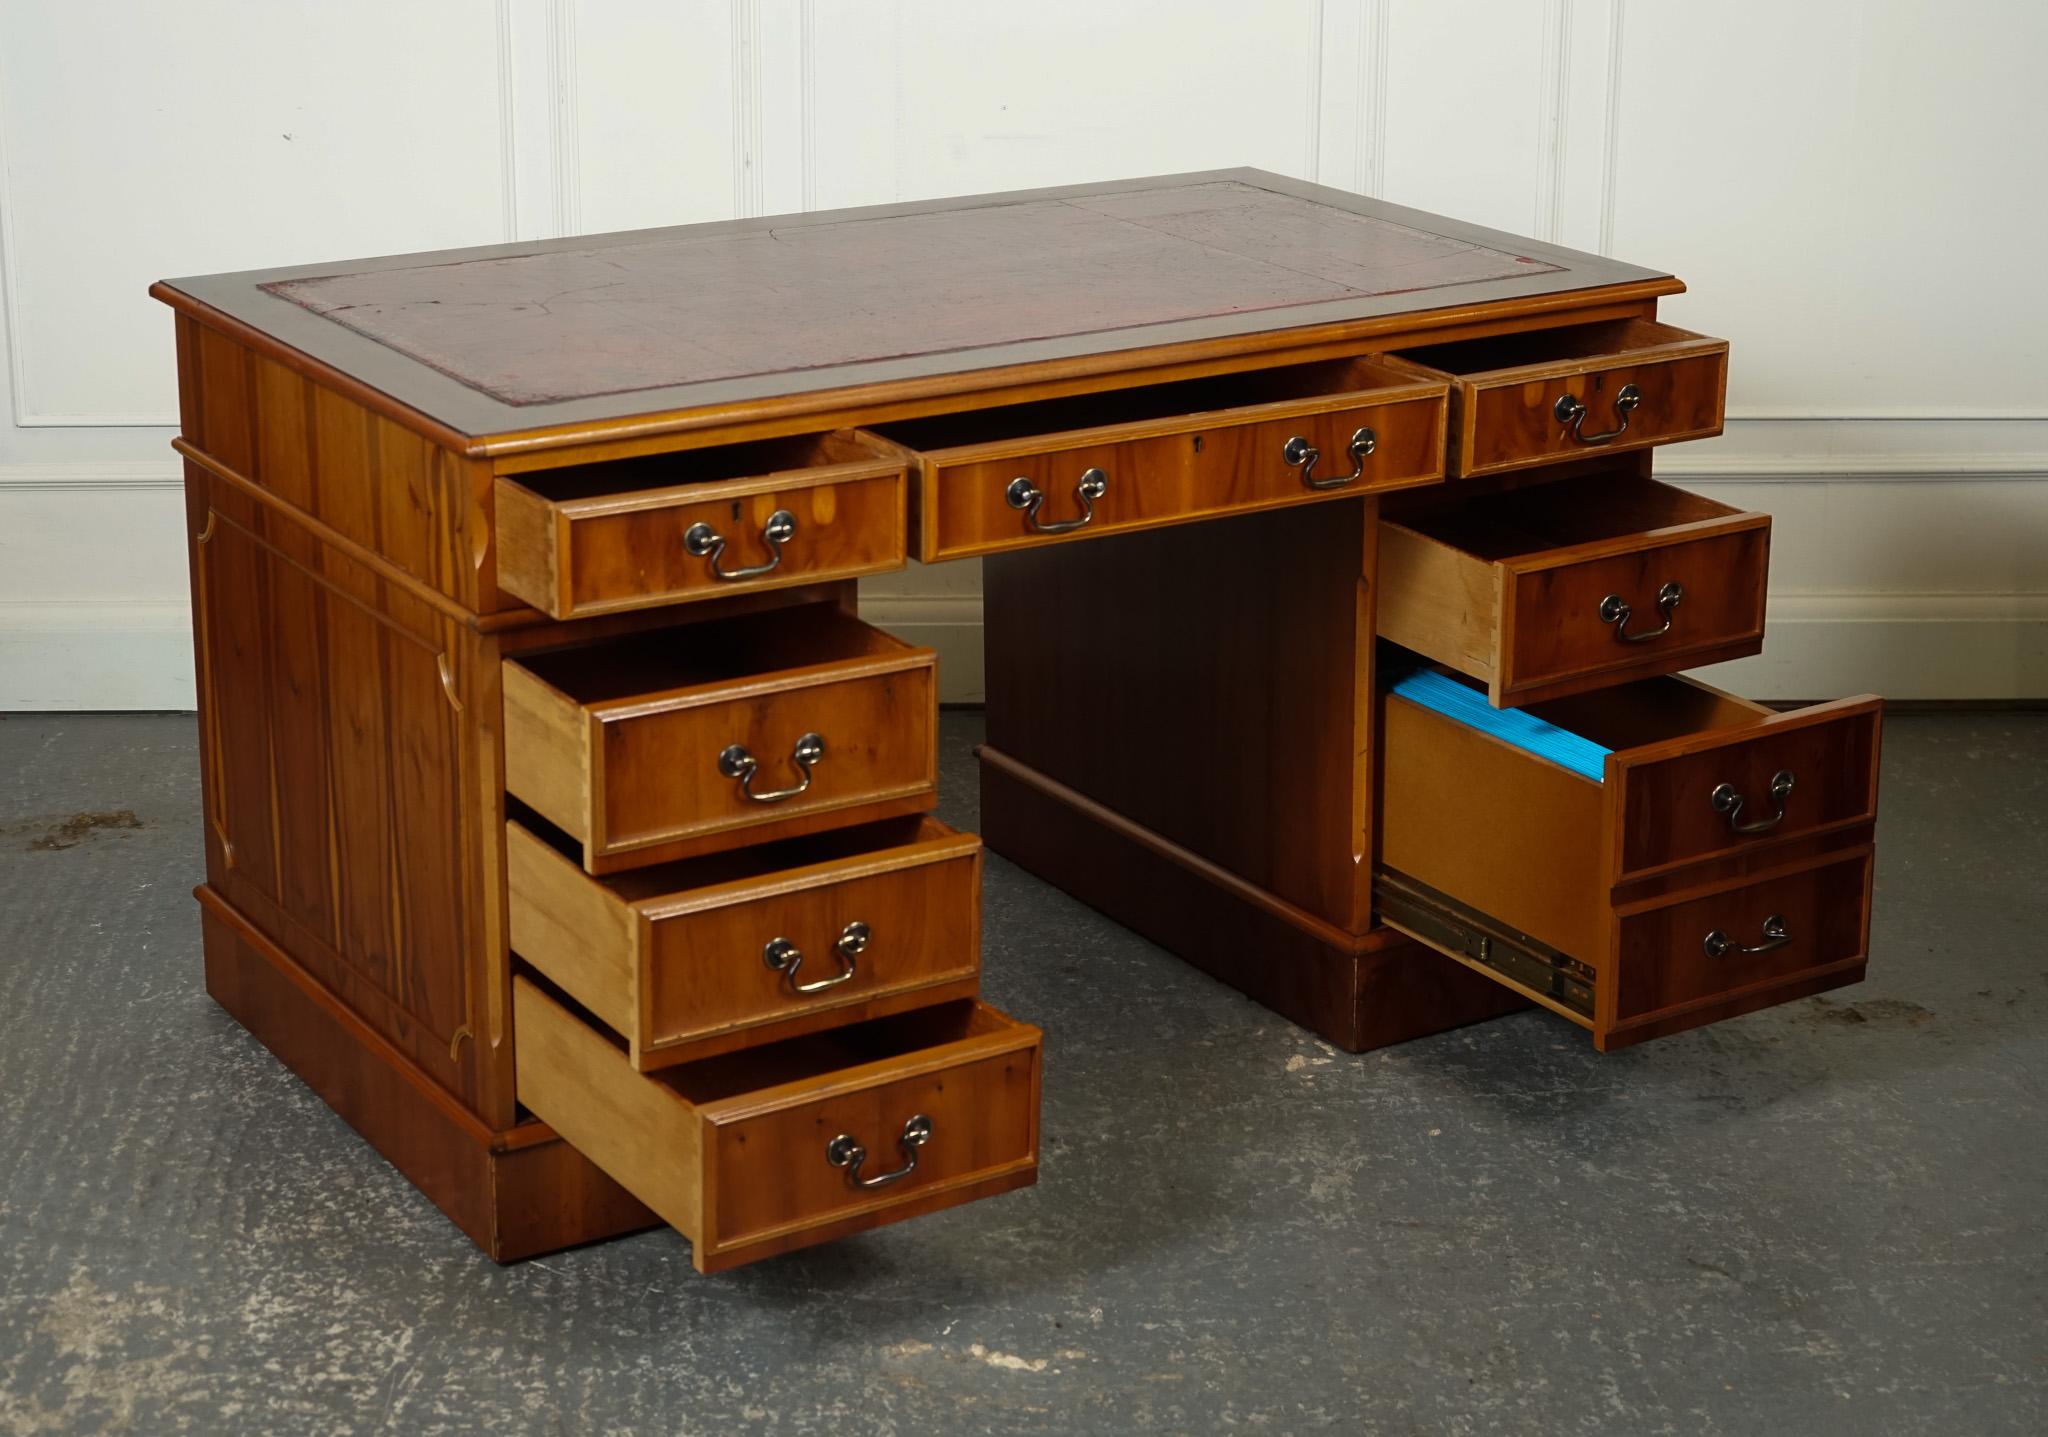 
We are delighted to offer for sale this Vintage Yew Twin Pedestal Desk With Burgundy Leather Top.

This vintage Yew twin pedestal desk with a burgundy leather top exudes an aura of classic refinement and traditional charm. Crafted from beautiful